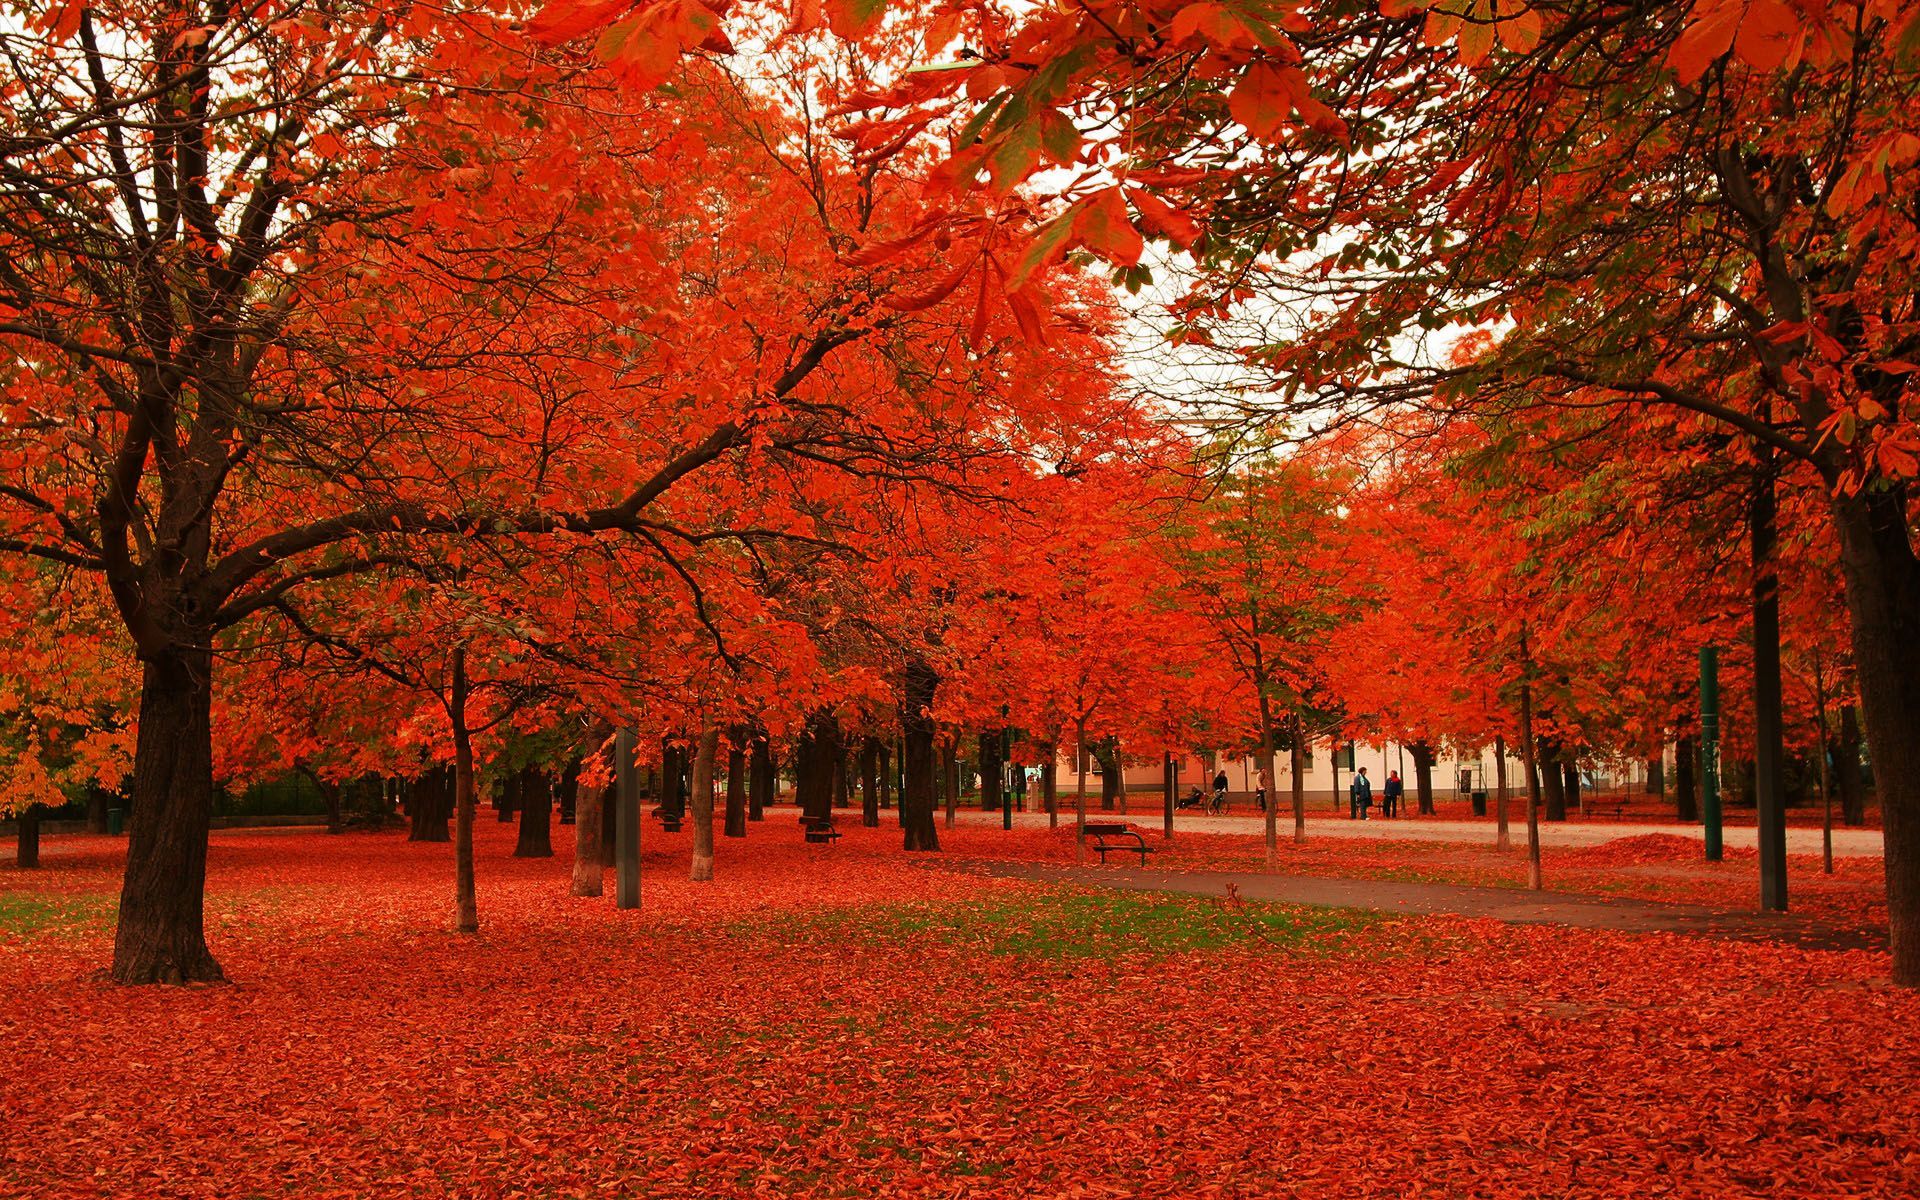 Fall Foliage Image Download Free. | Nature Wallpaper Picture ...